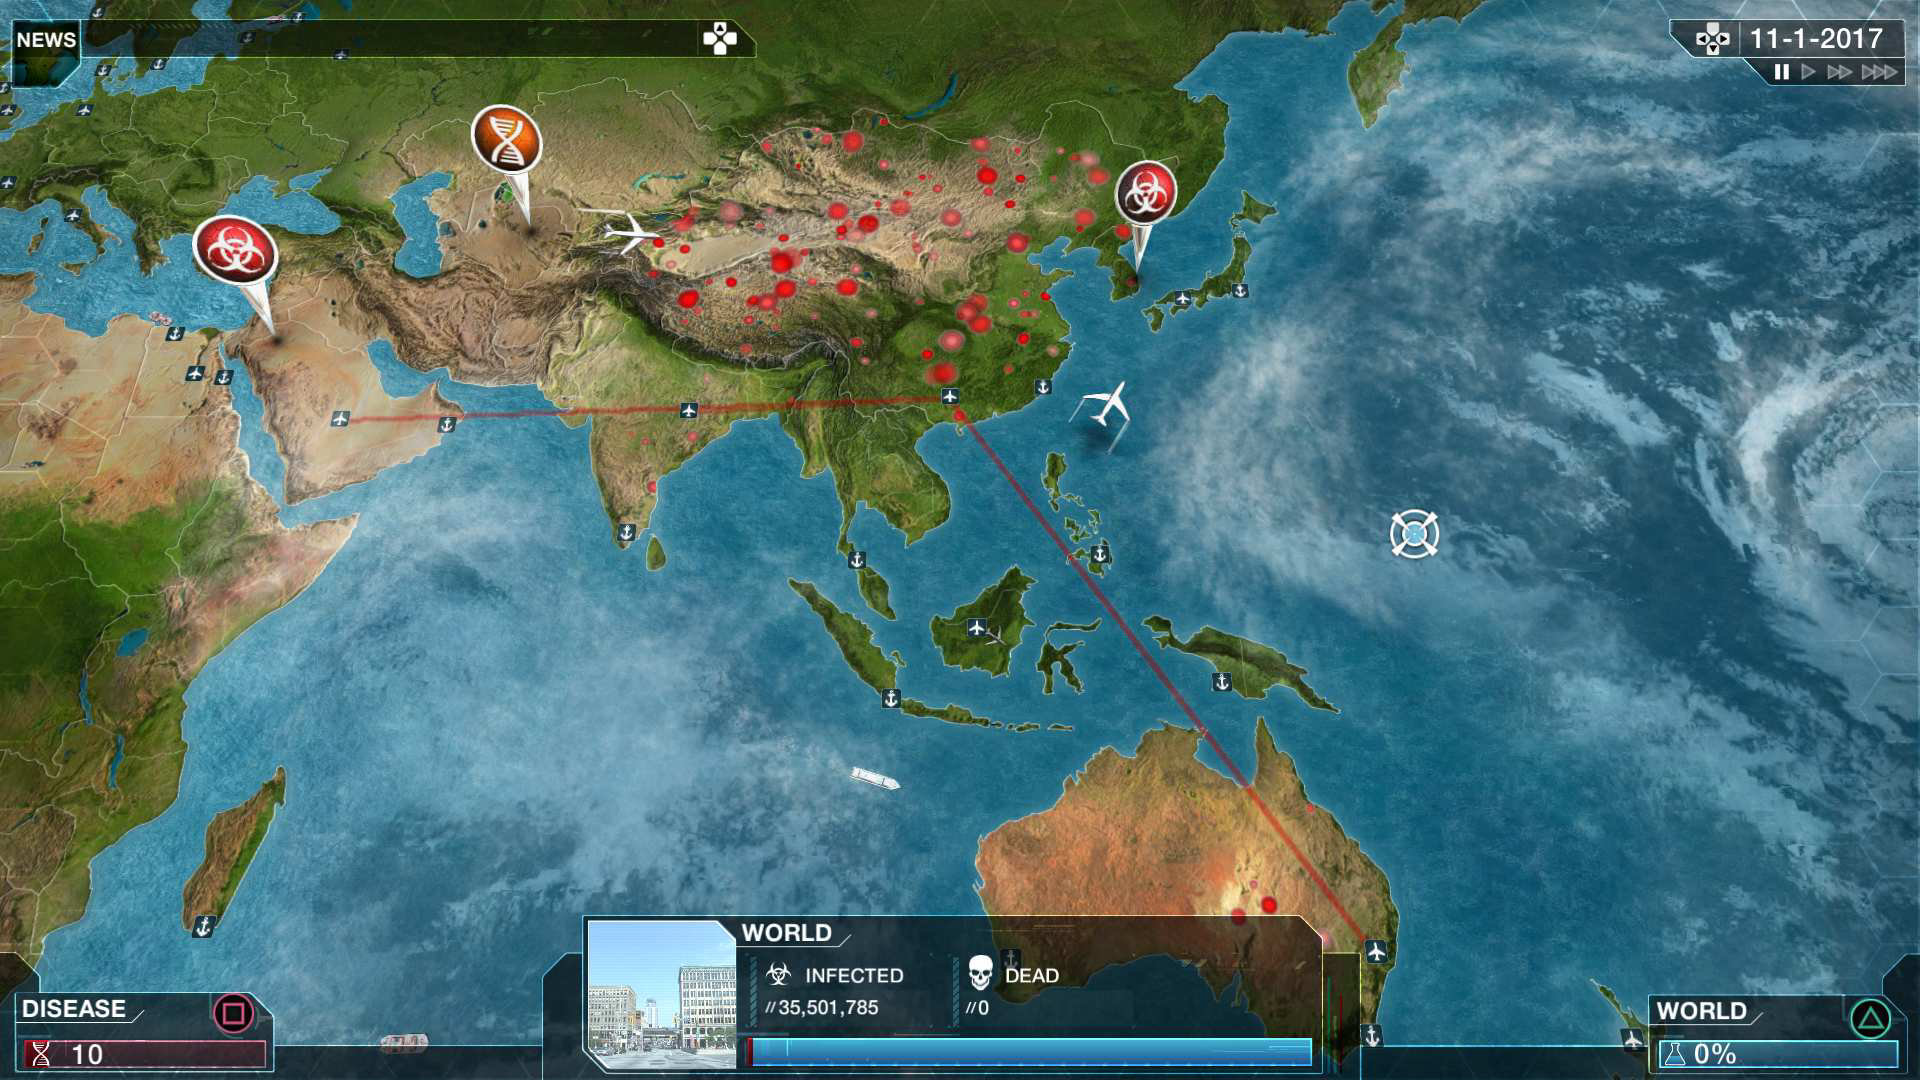 Plague Inc Free Update Lets You Save The World Instead 9to5toys